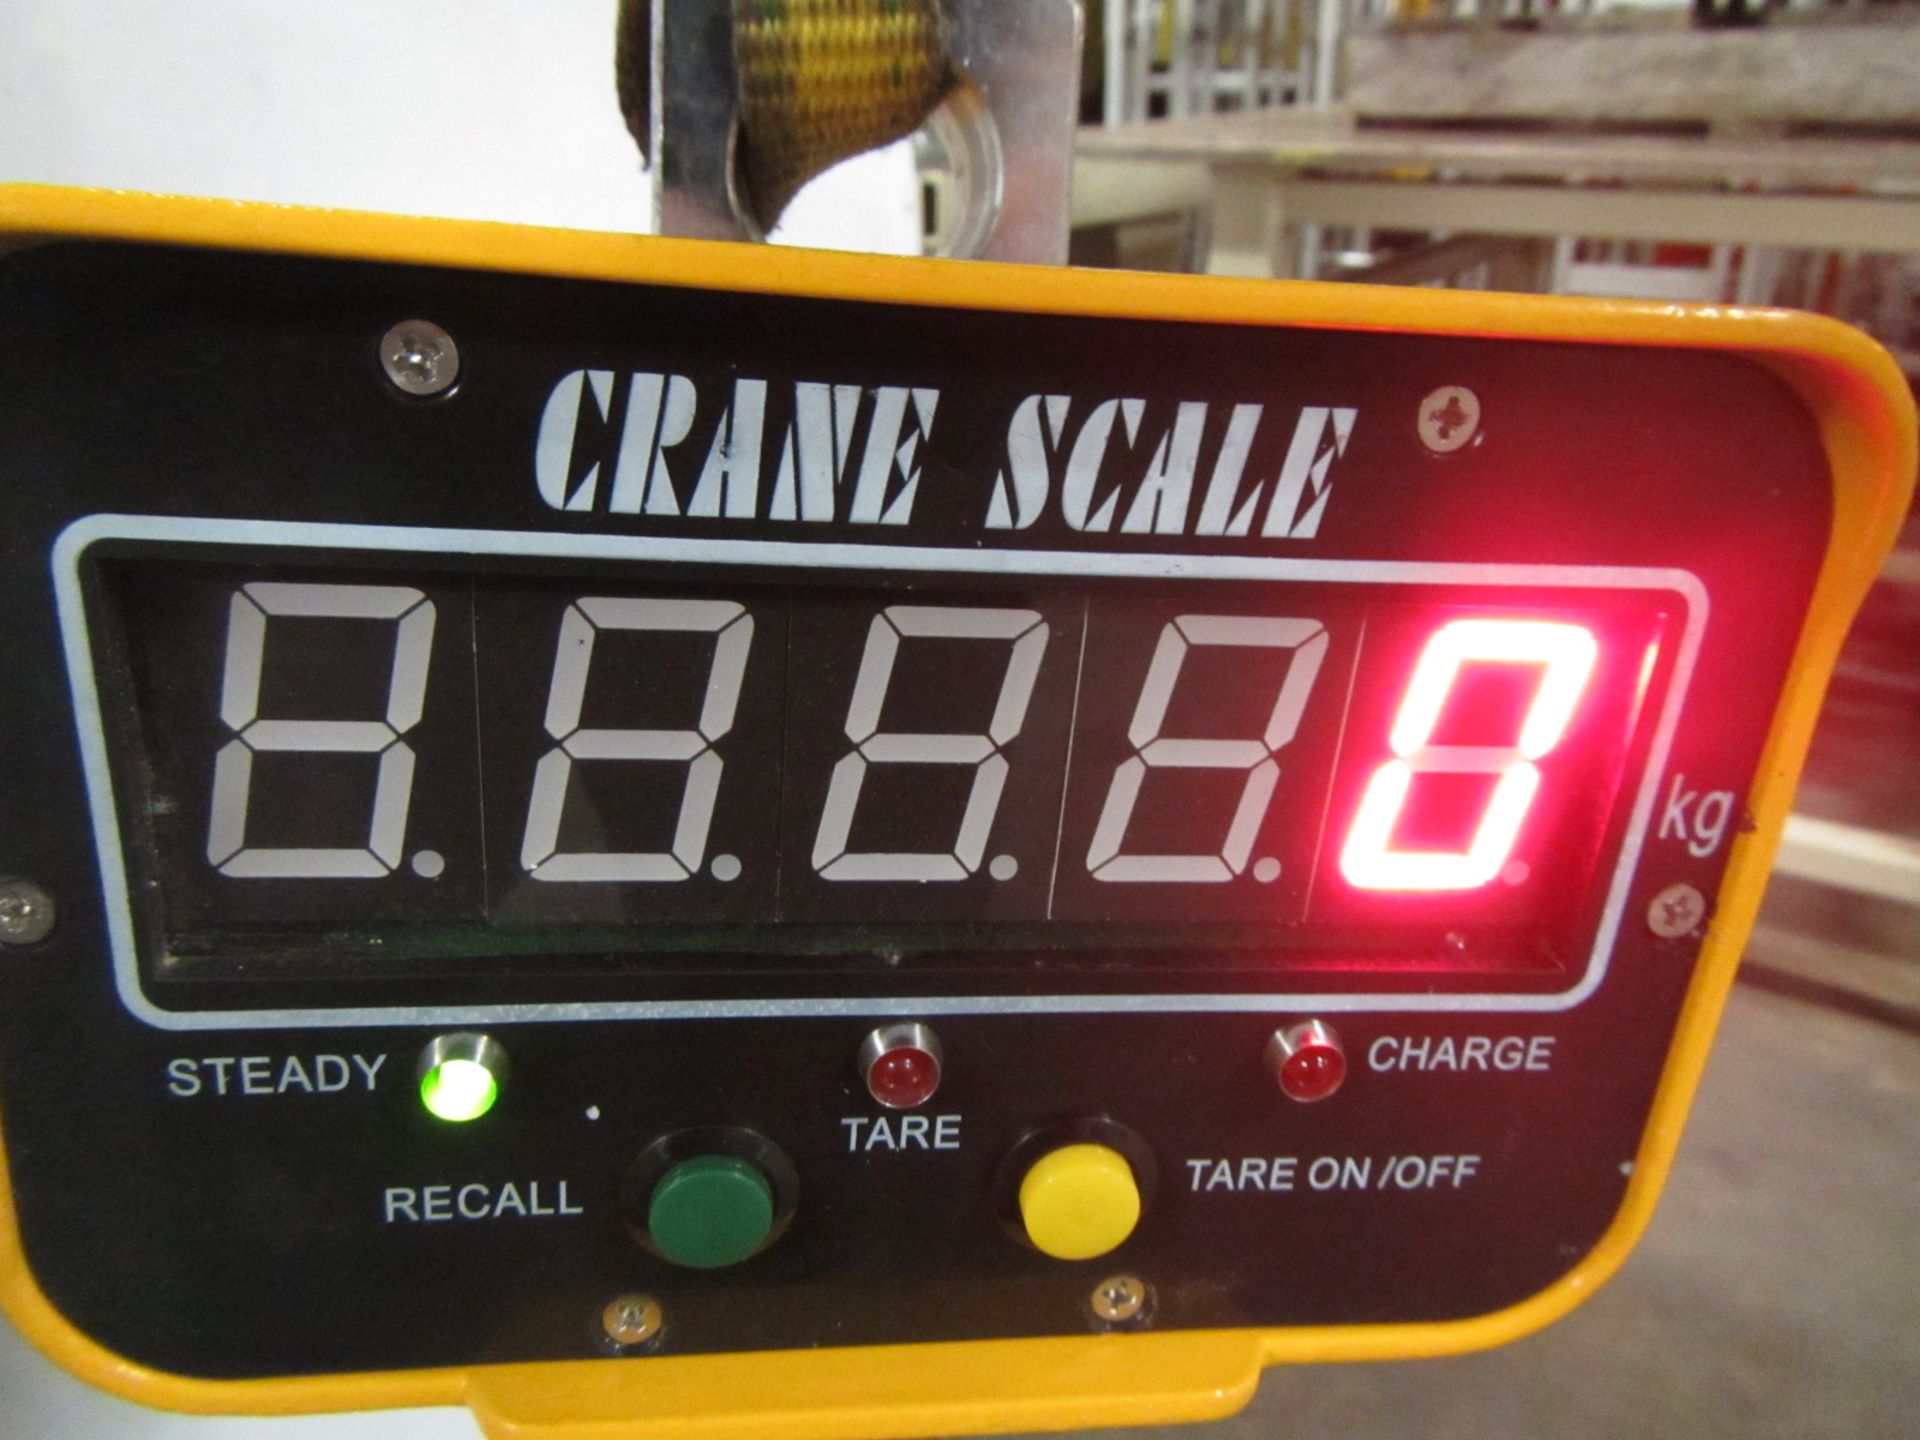 Hanging MINT Digital Crane Scale 10,000lbs 5 ton Capacity - complete with remote control and - Image 2 of 2